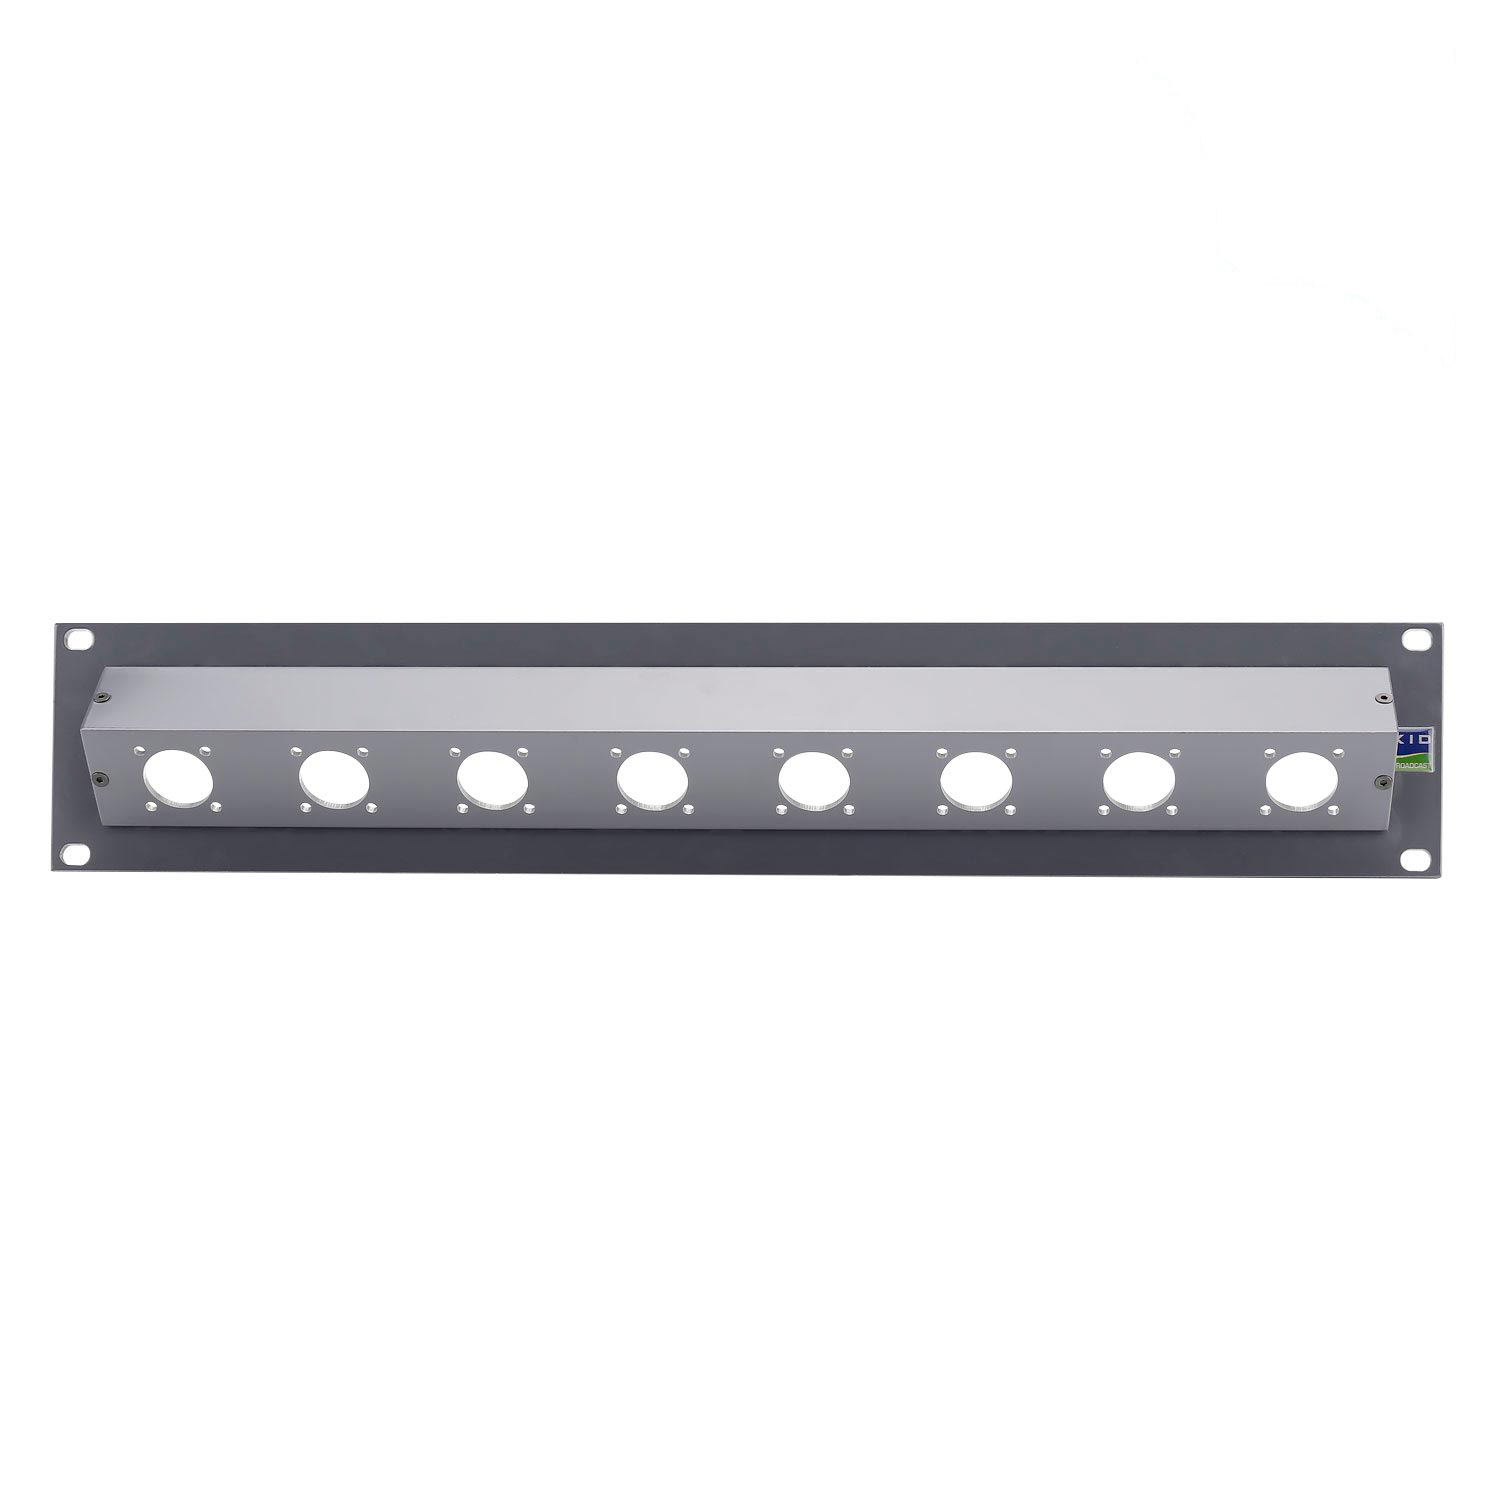 Sommer cable Audio-patch panel Triax-blank panel , 1 HE, 4 mm powder-coated aluminum, colour: grey